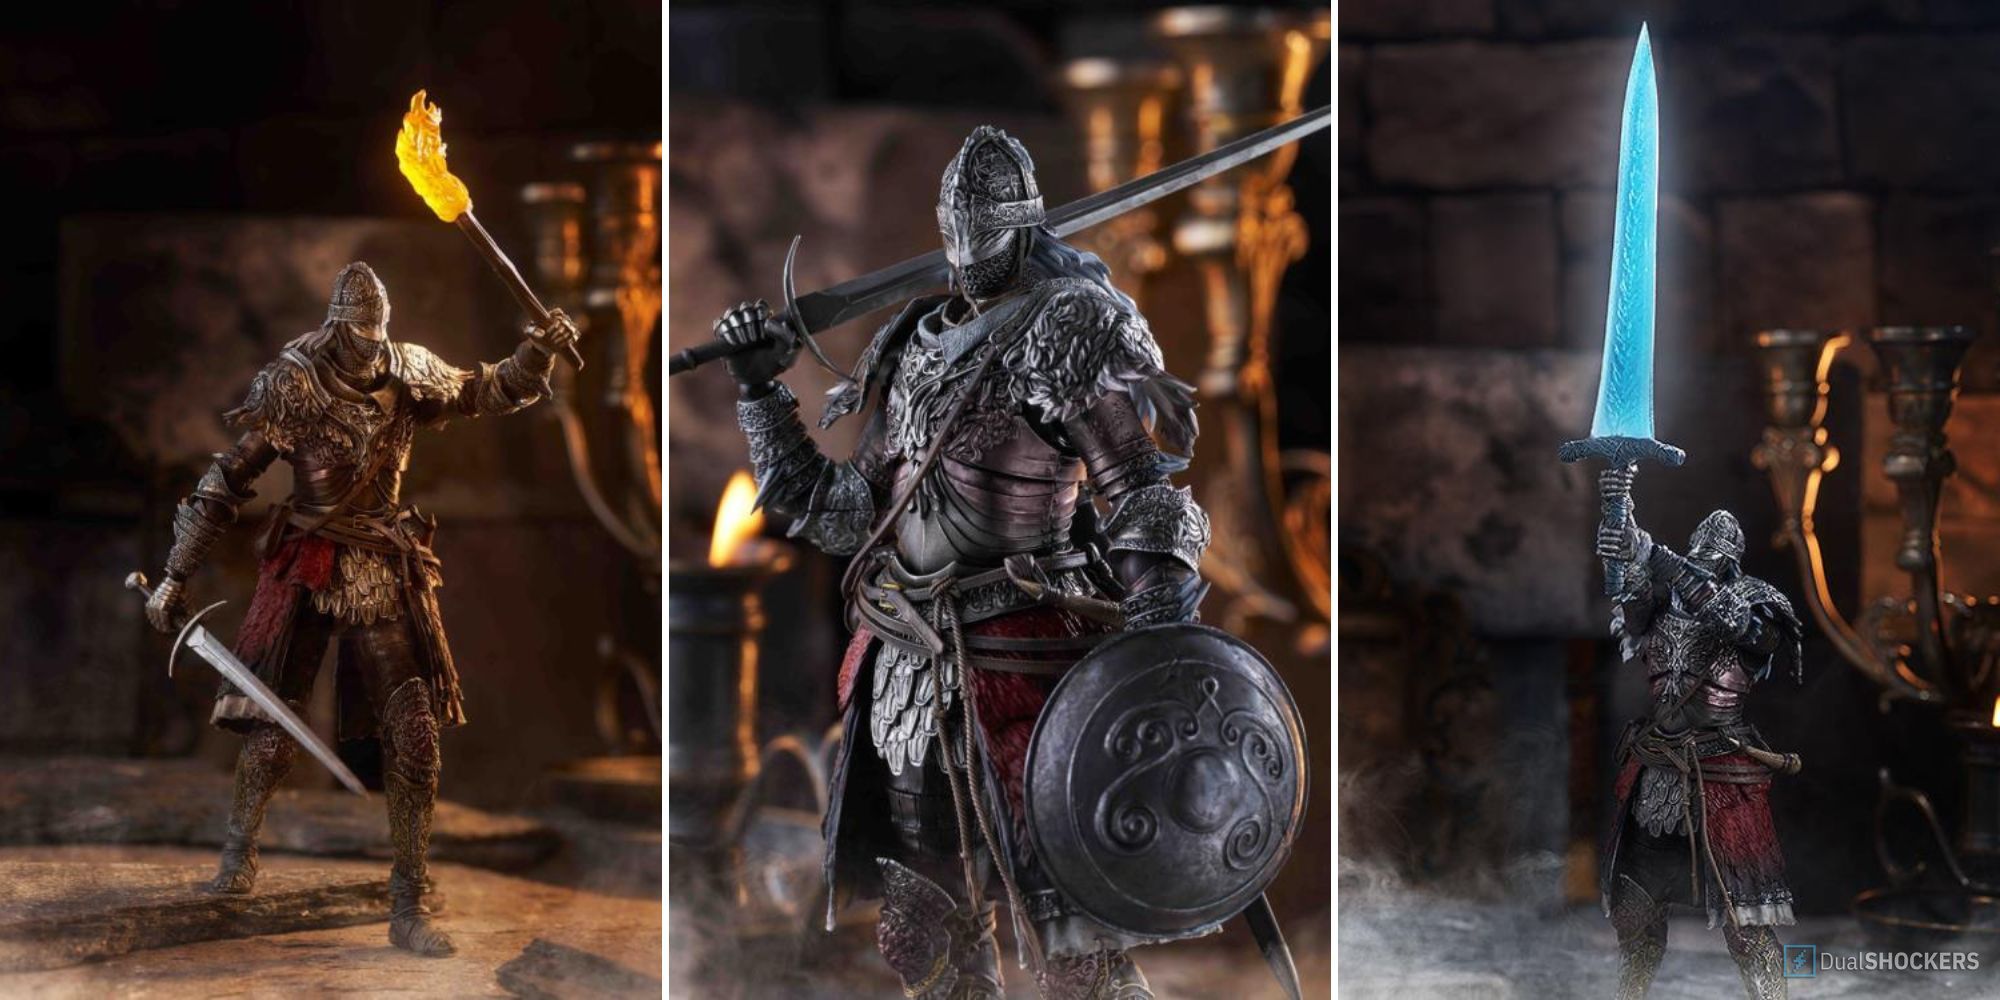 Split image showing different poses of the Elden Ring Raging Wolf Figma Figure holding a torch, a sword and shield and a sword glowing blue.